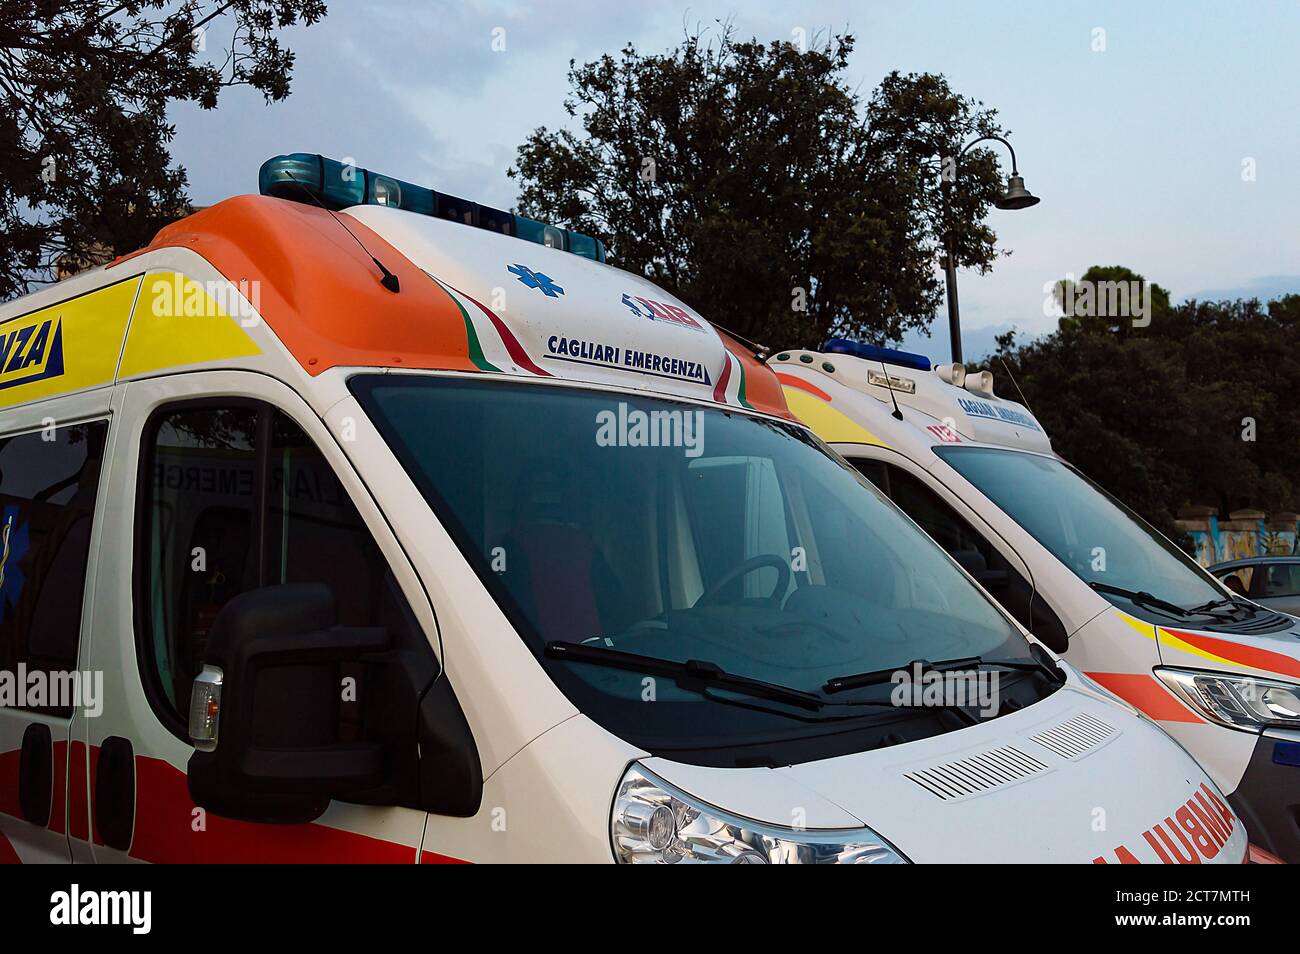 Some ambulances parked in a city area Stock Photo